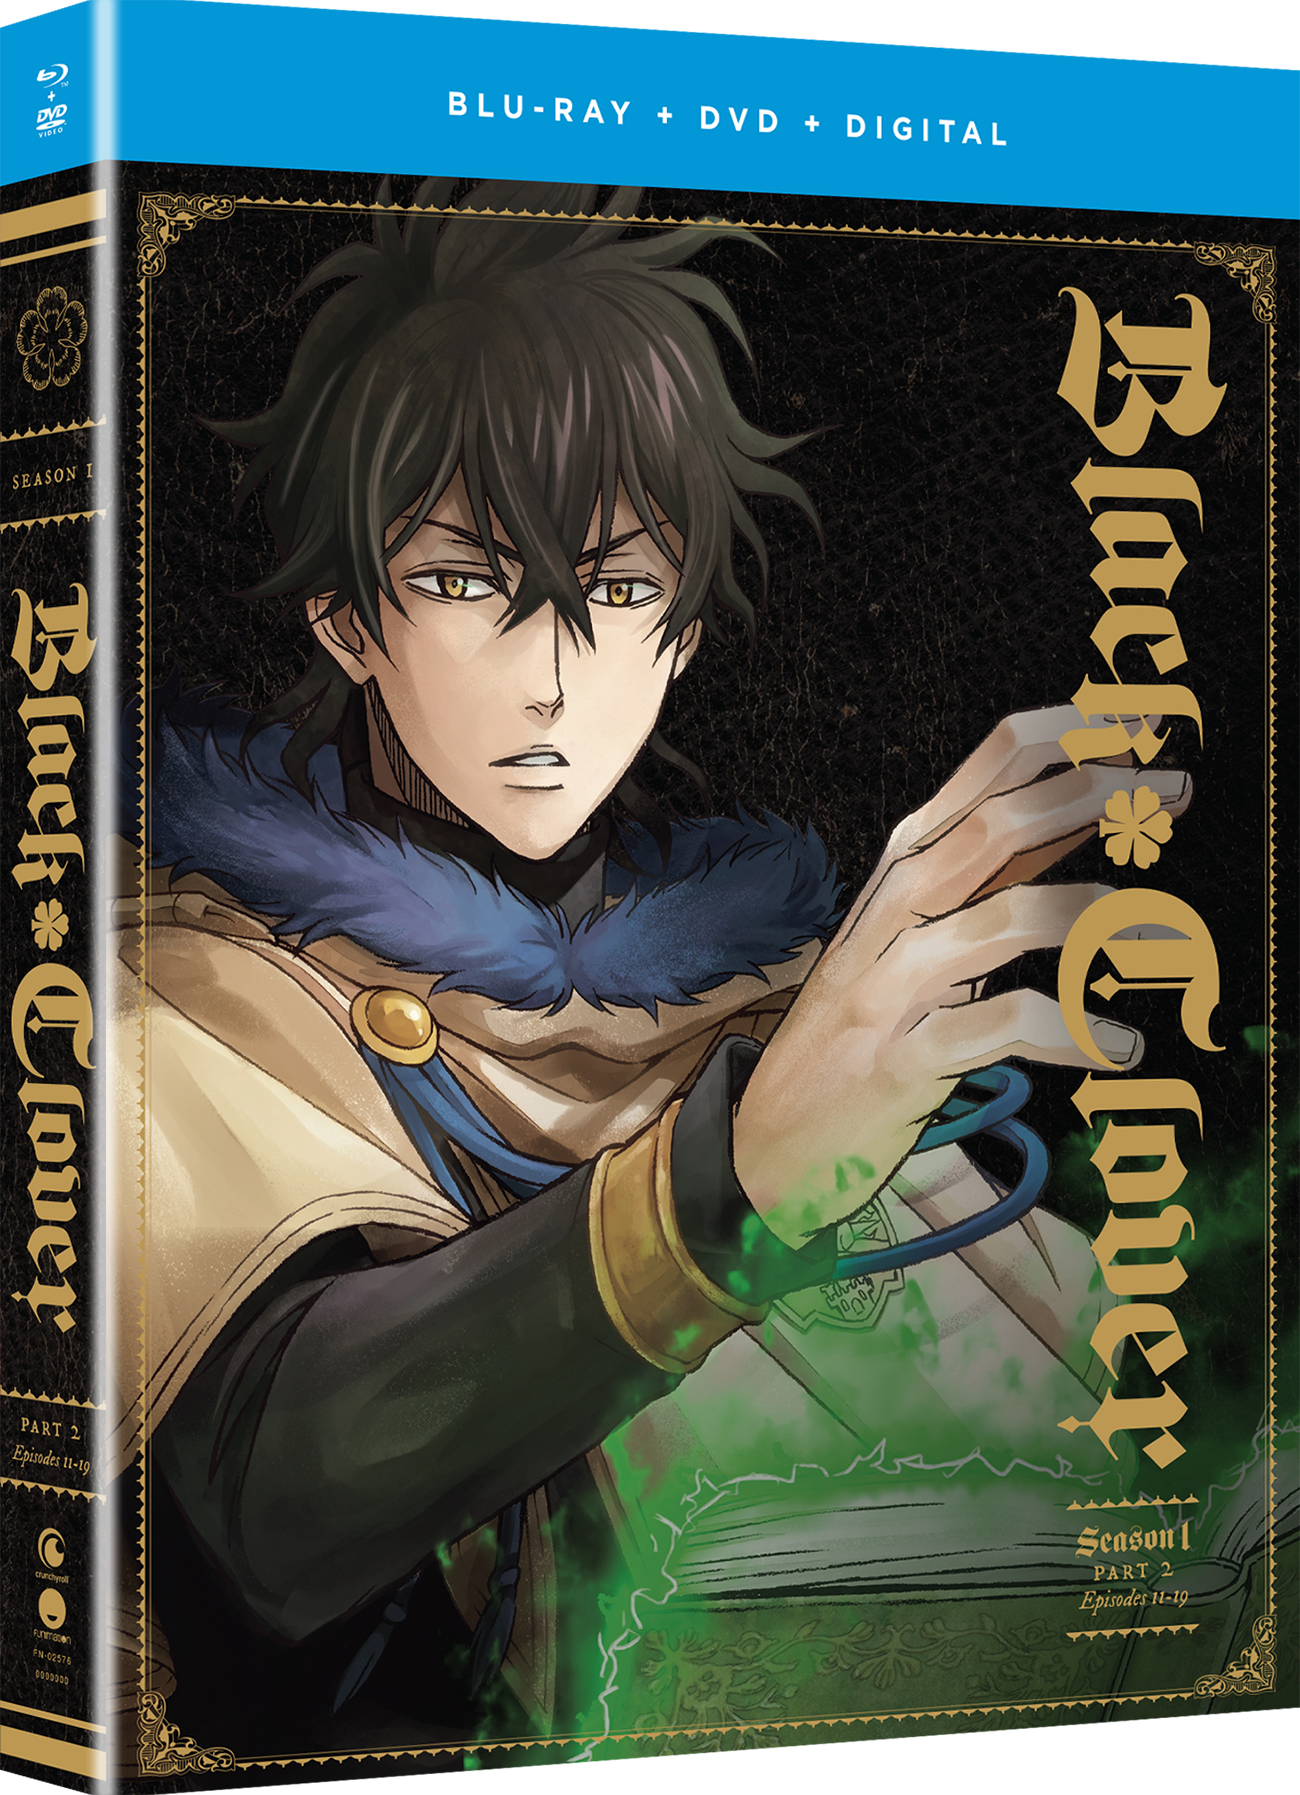 Code For Clover Kingdom : Black Clover | Clover Kingdom / Codes at sixty thousand likes!